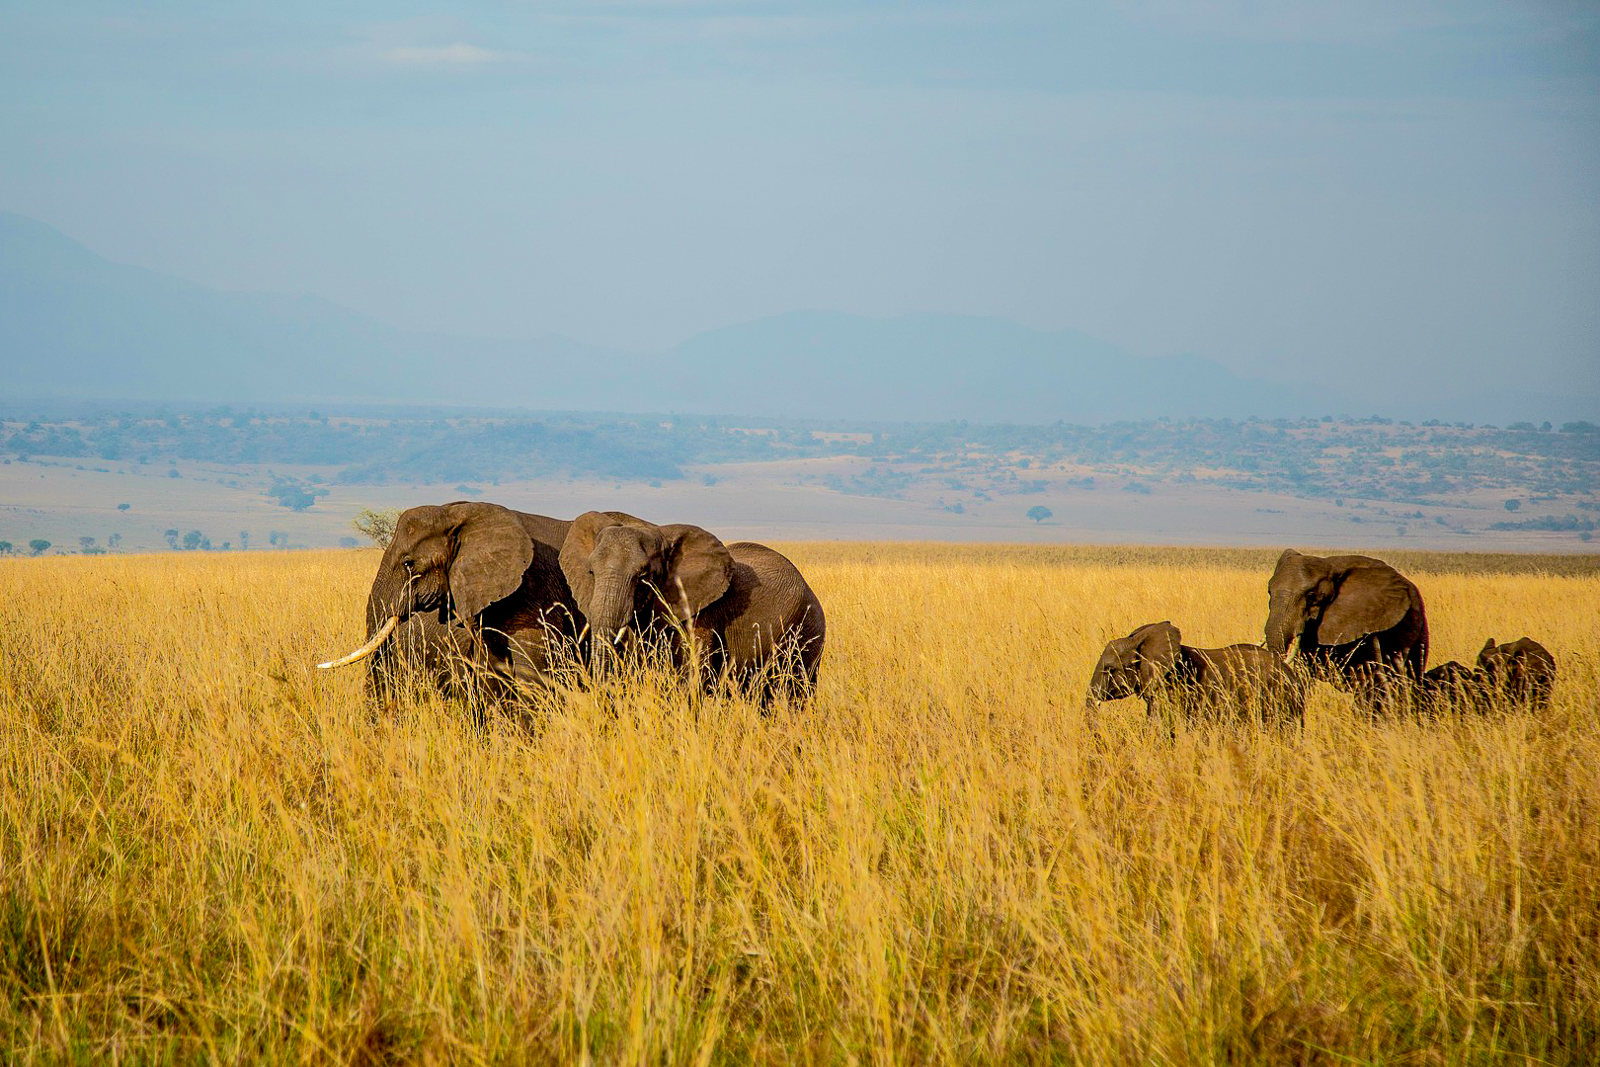 A group of elephants in Kidepo National Park